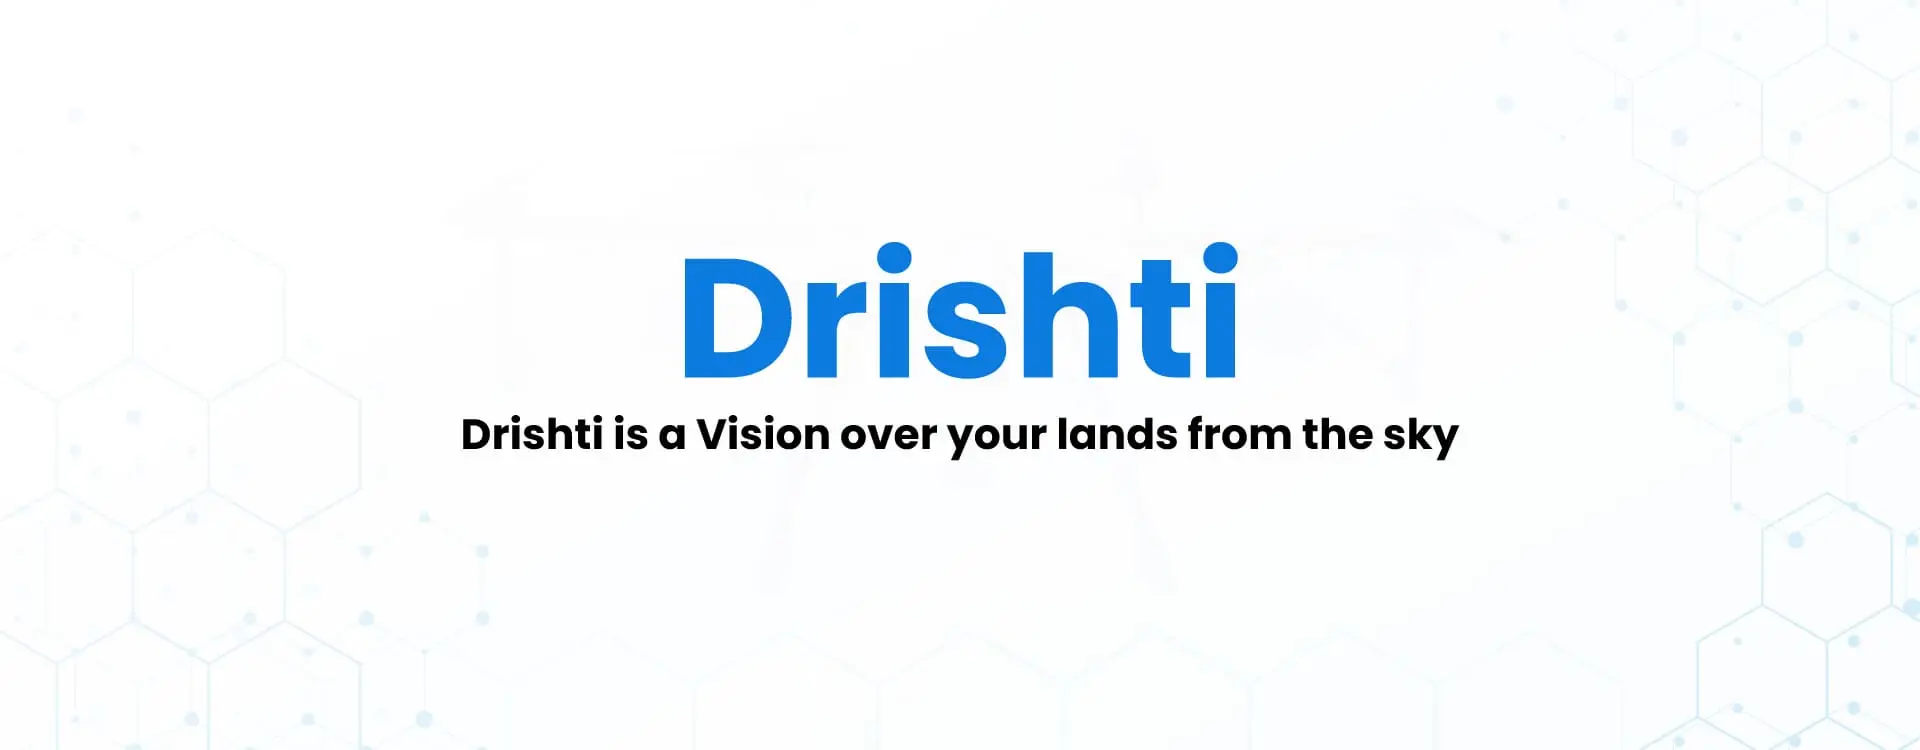 Drishti is a vision over your lands from the sky